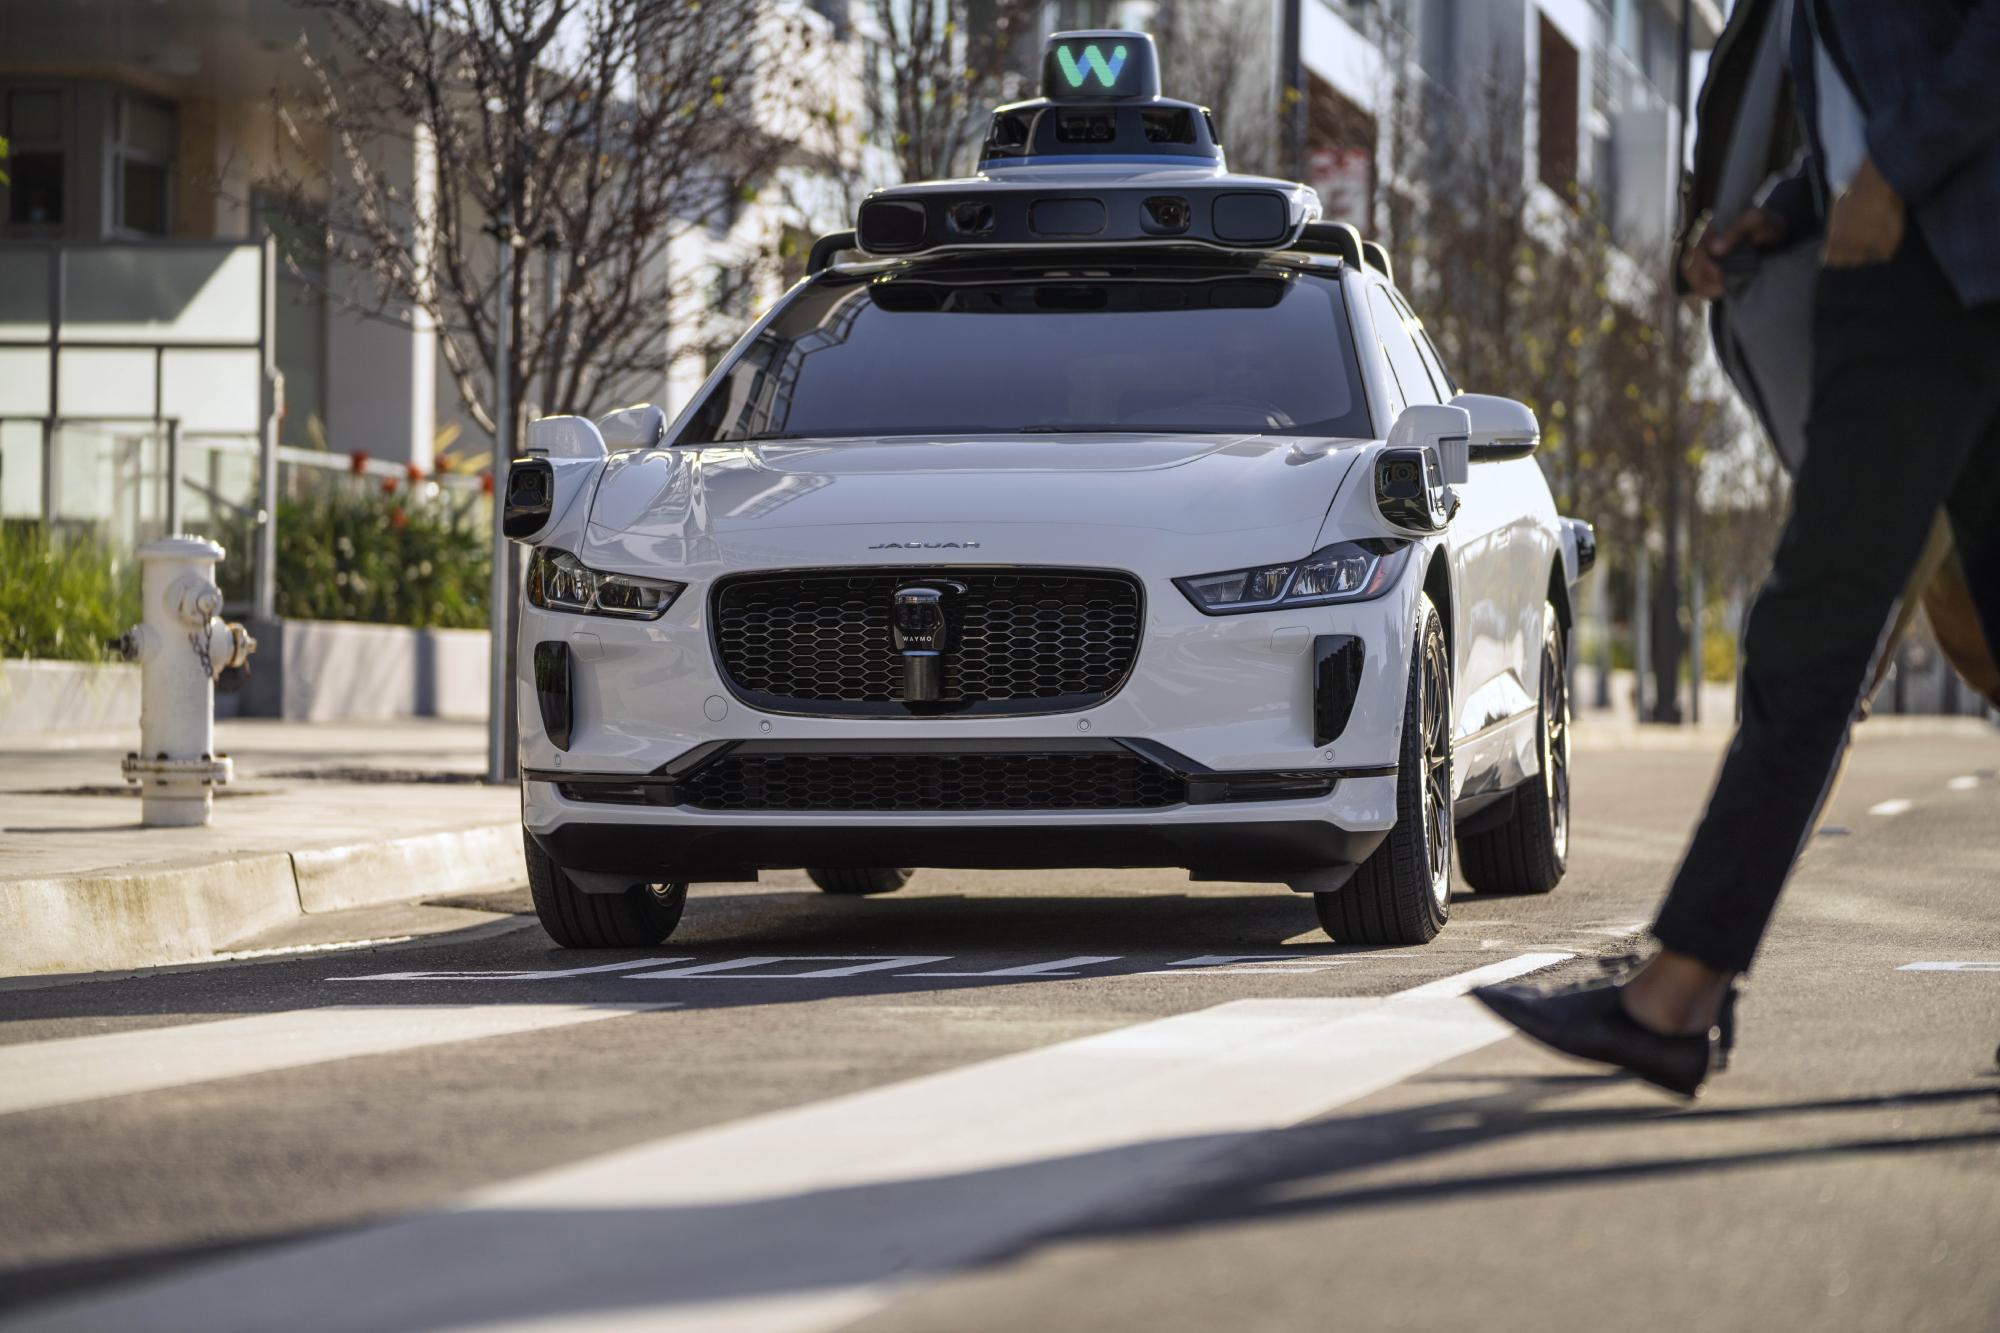 Waymo’s autonomous technology is showcased in the Jaguar I-Pace, which offers taxi rides in San Francisco.